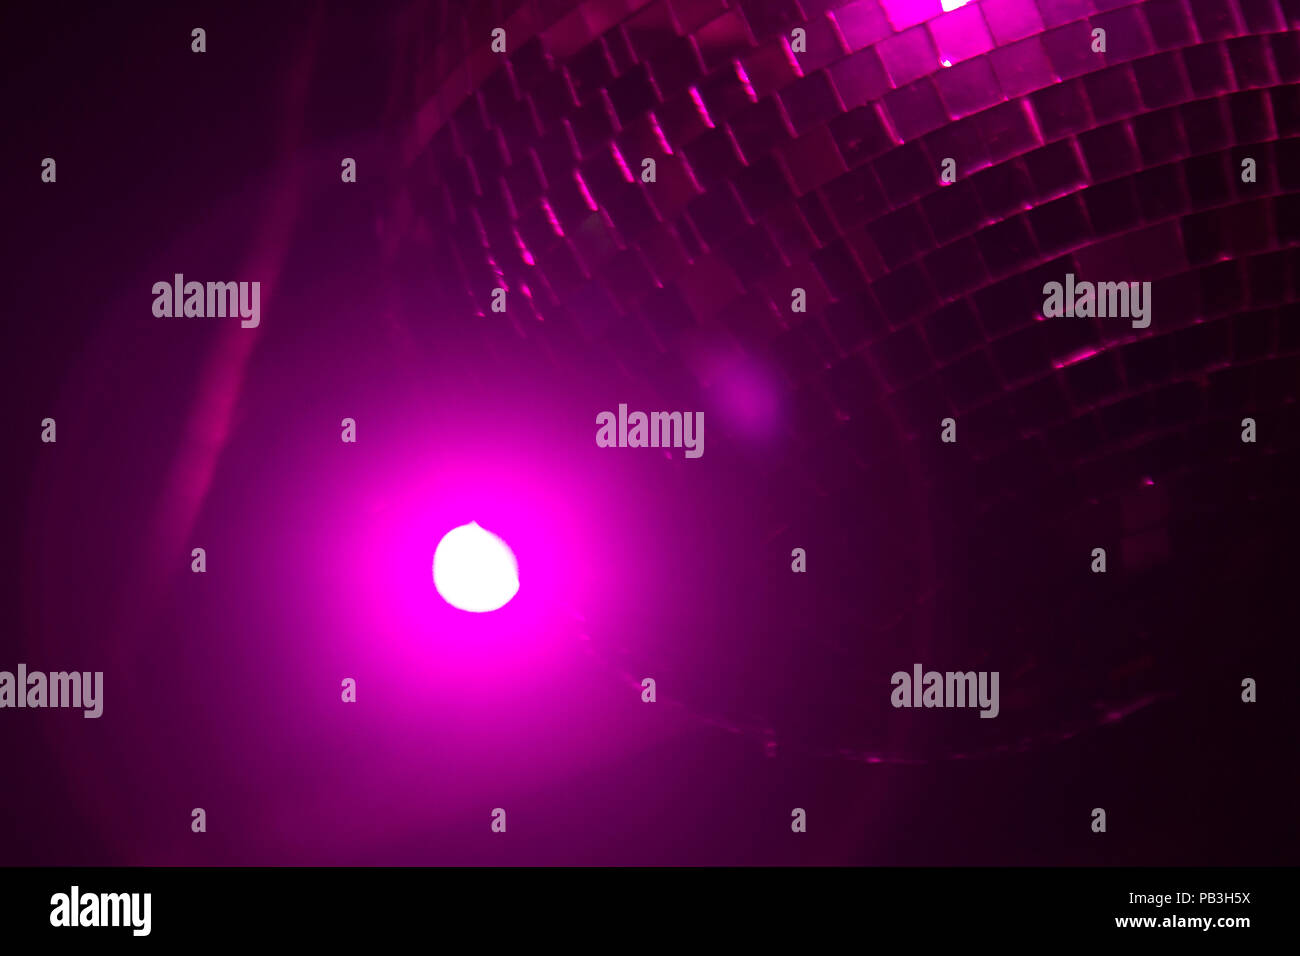 Wallpaper Background Of Sparkling Disco Ball Illuminated By A Pink Laser Light At A Party No People Stock Photo Alamy